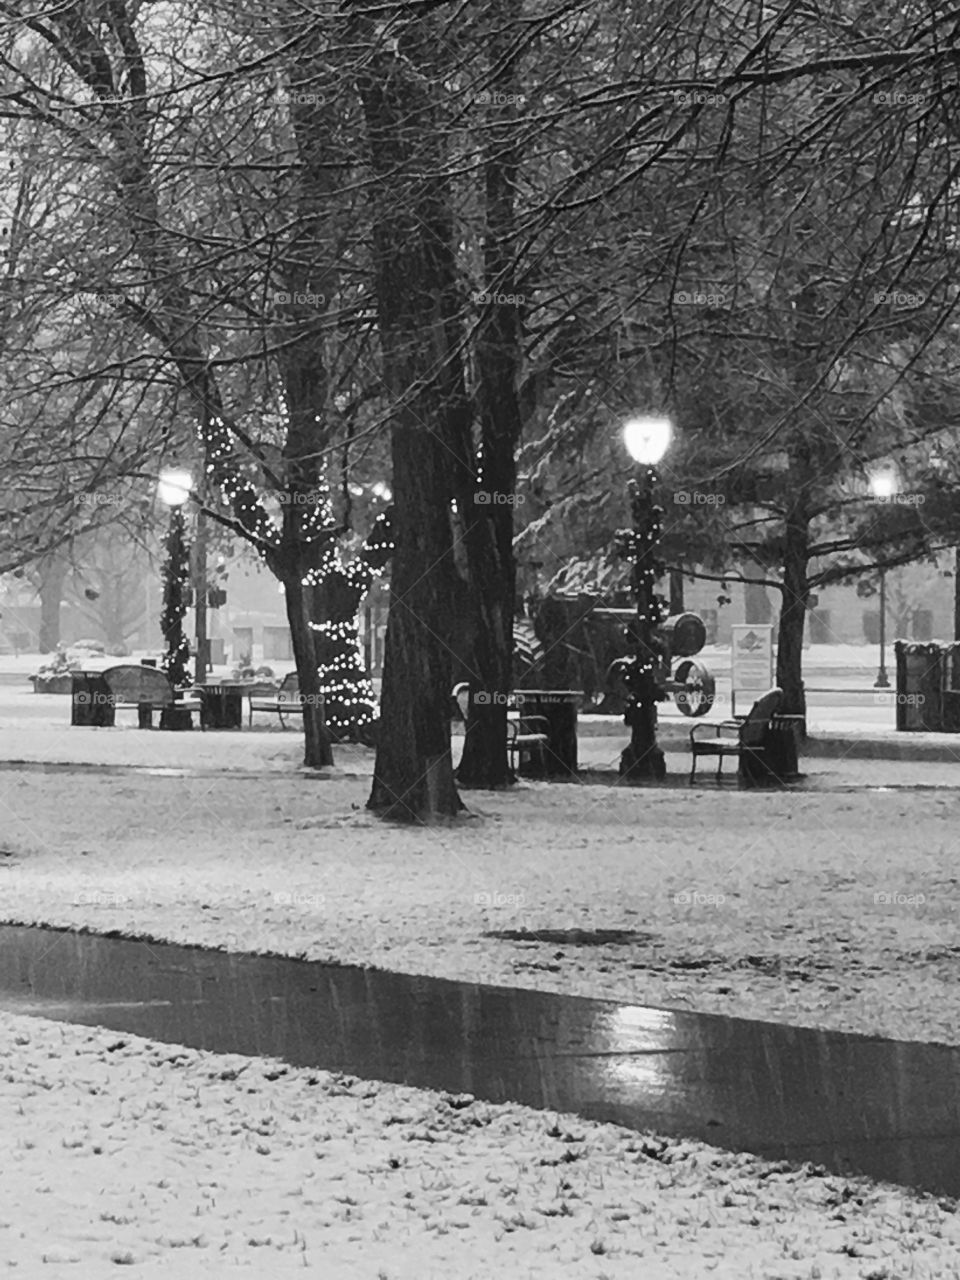 Picture of the town square during the first snow of the season.